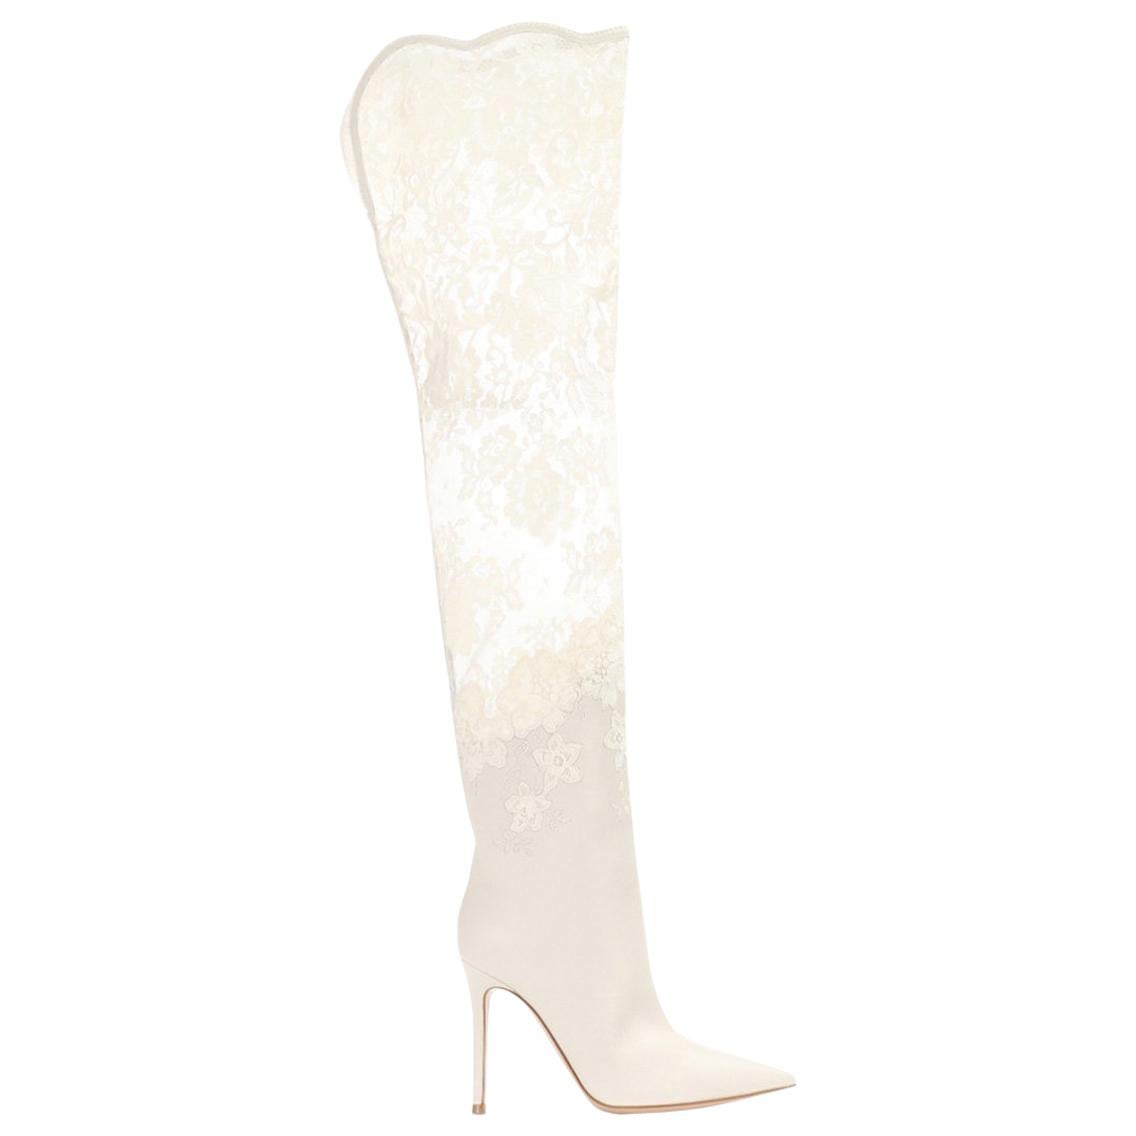 Gianvito Rossi Debrah Lace and Leather Over-The-Knee Boots